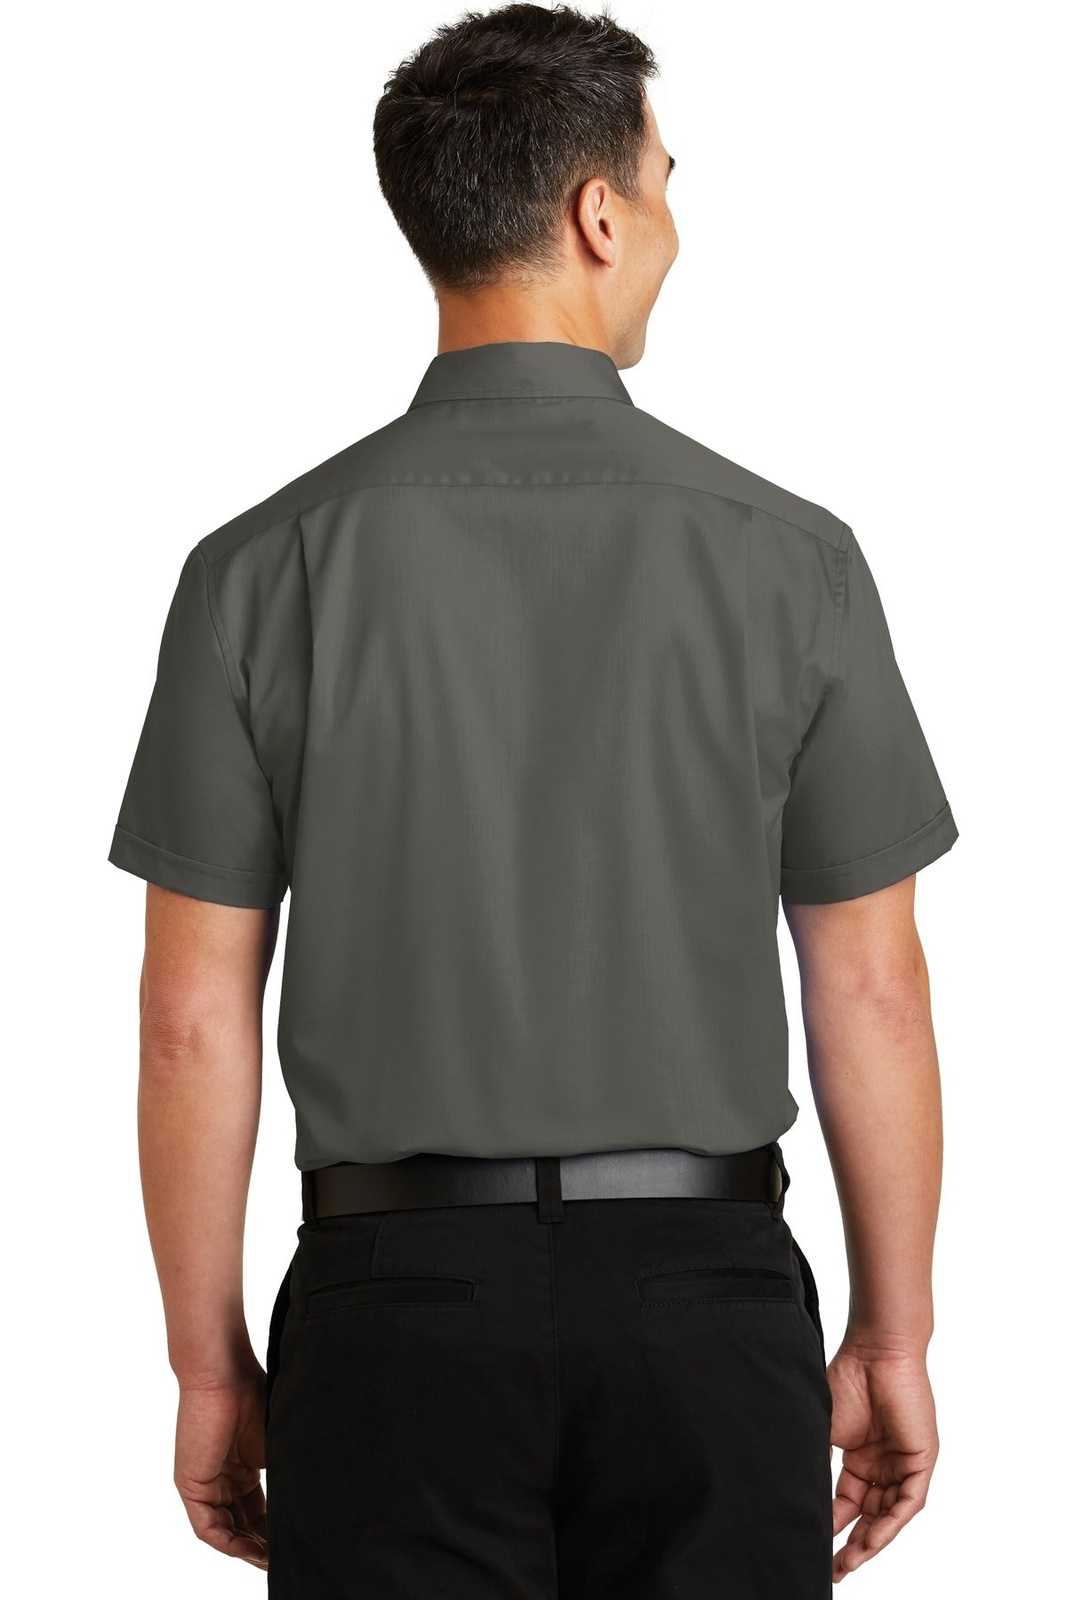 Port Authority S664 Short Sleeve SuperPro Twill Shirt - Sterling Gray - HIT a Double - 2